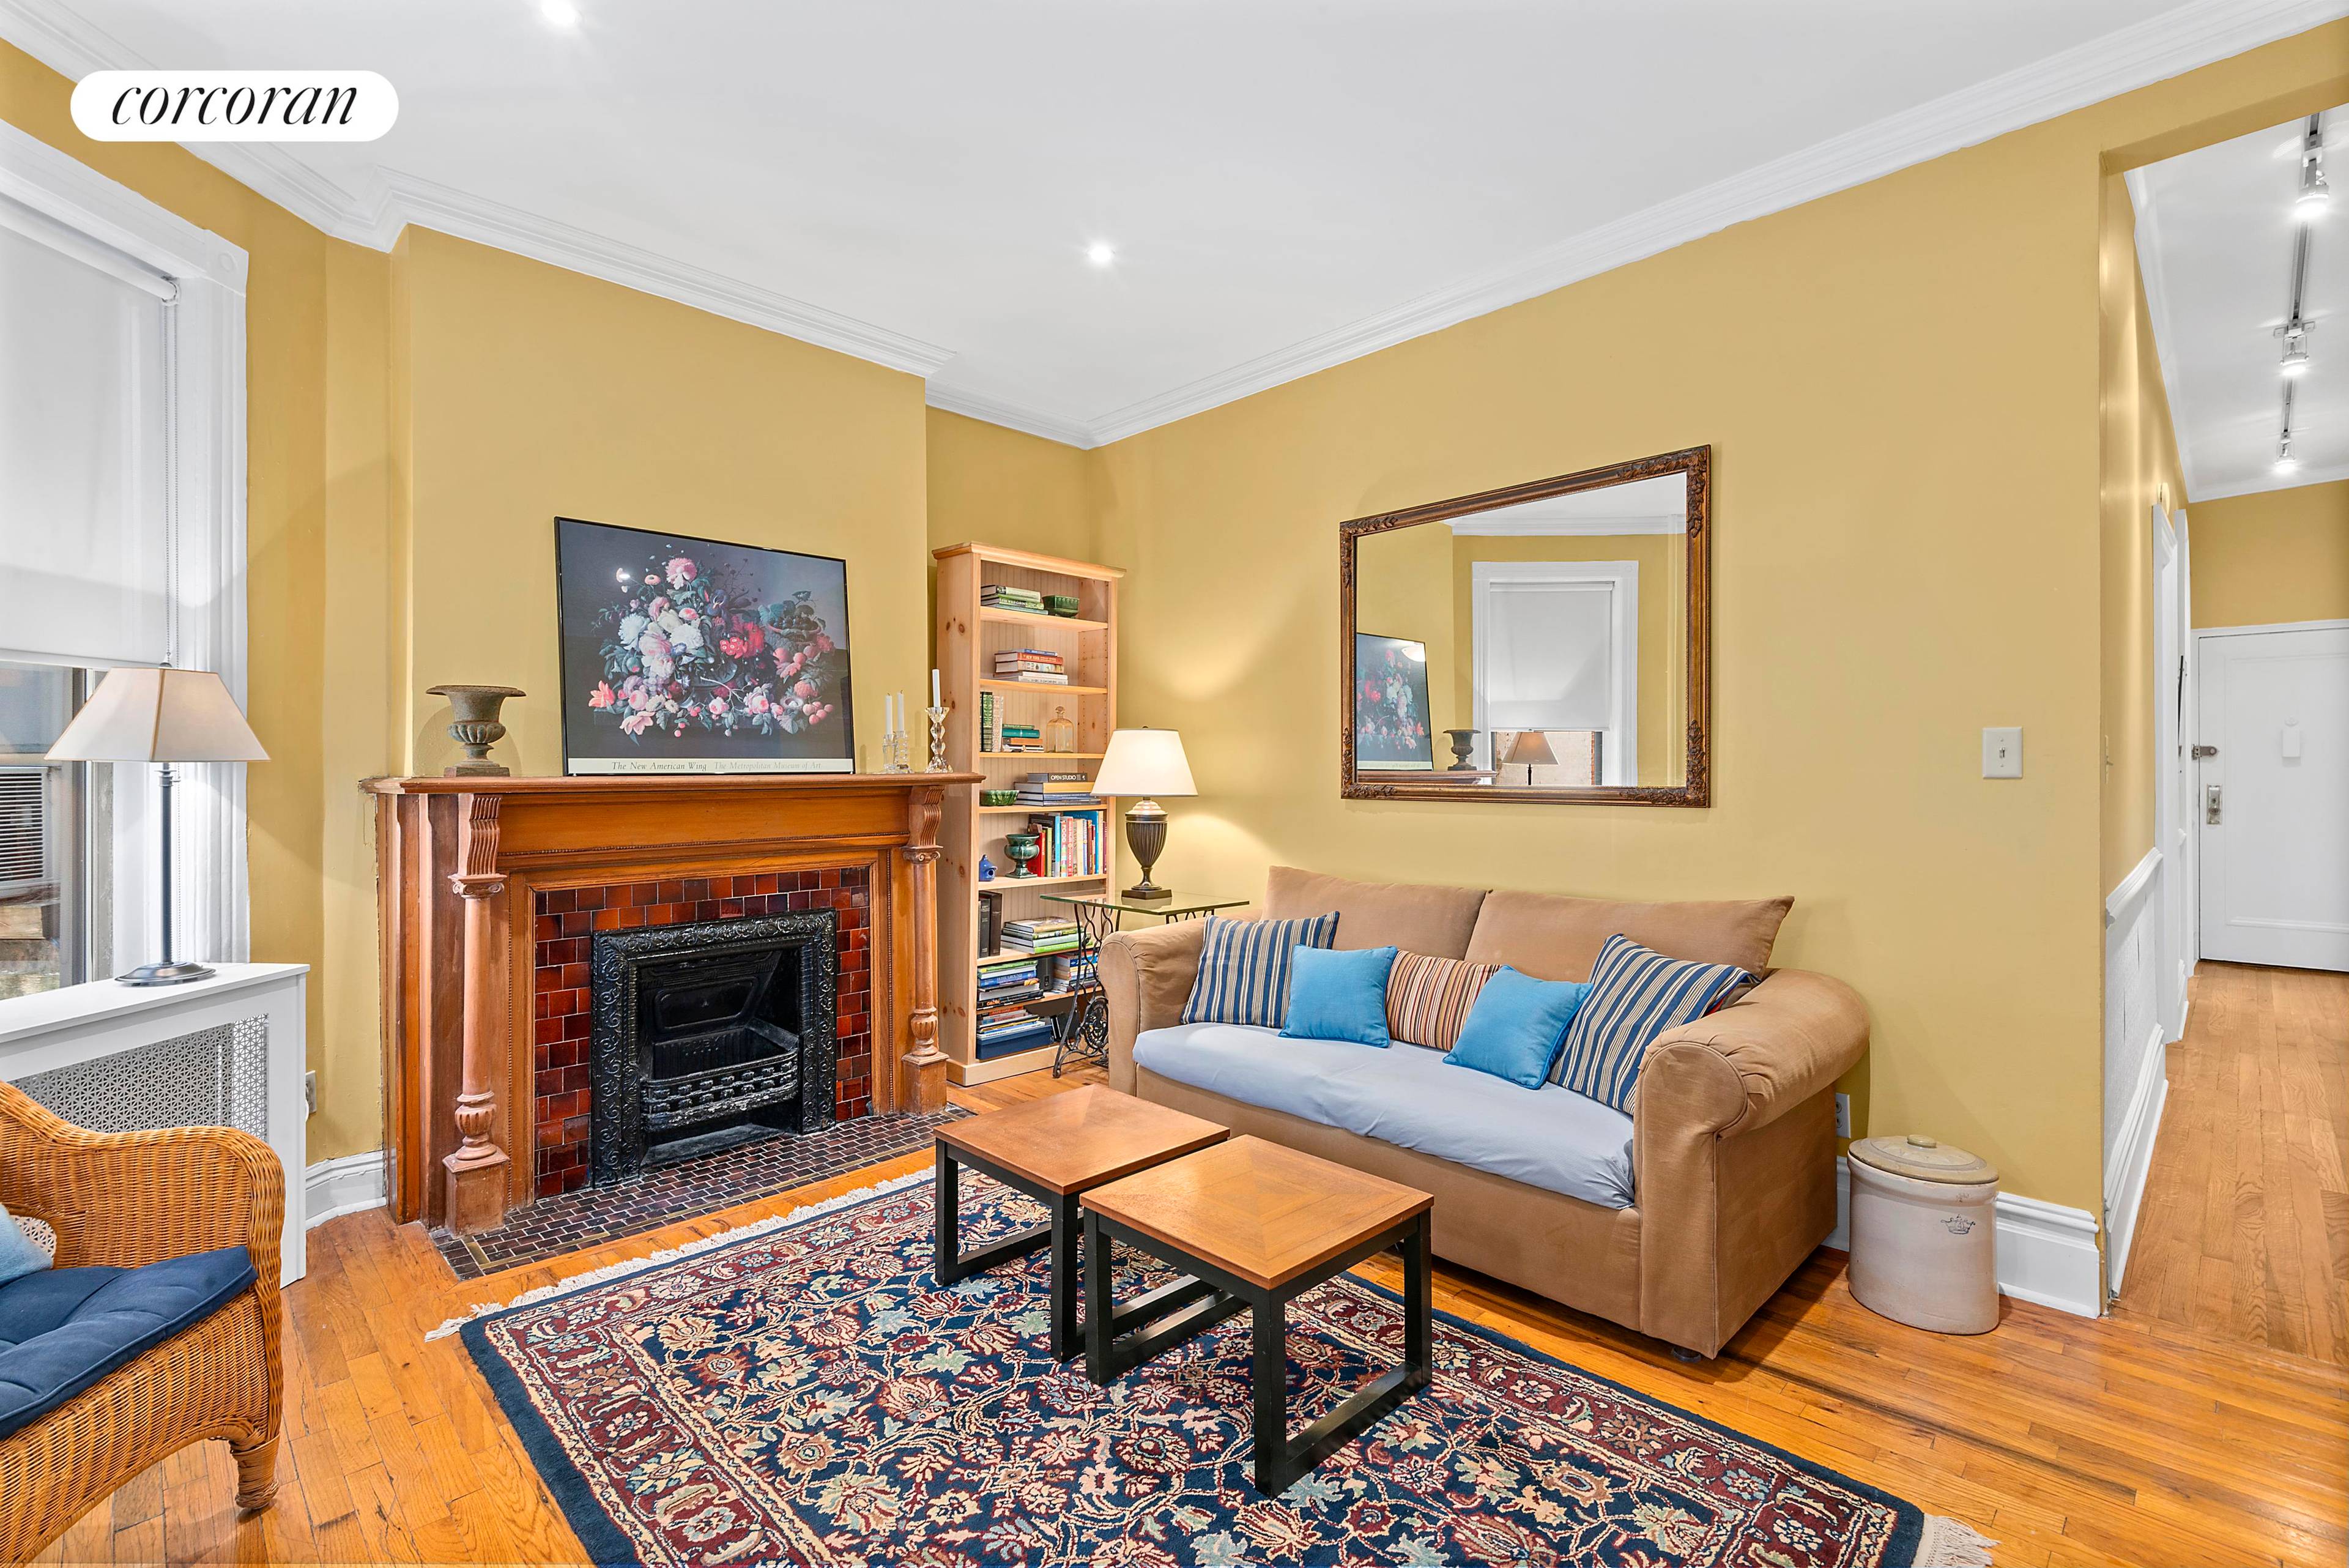 Serenity is yours ! Up one flight from exciting Vanderbilt Avenue is this charming one bedroom apartment.